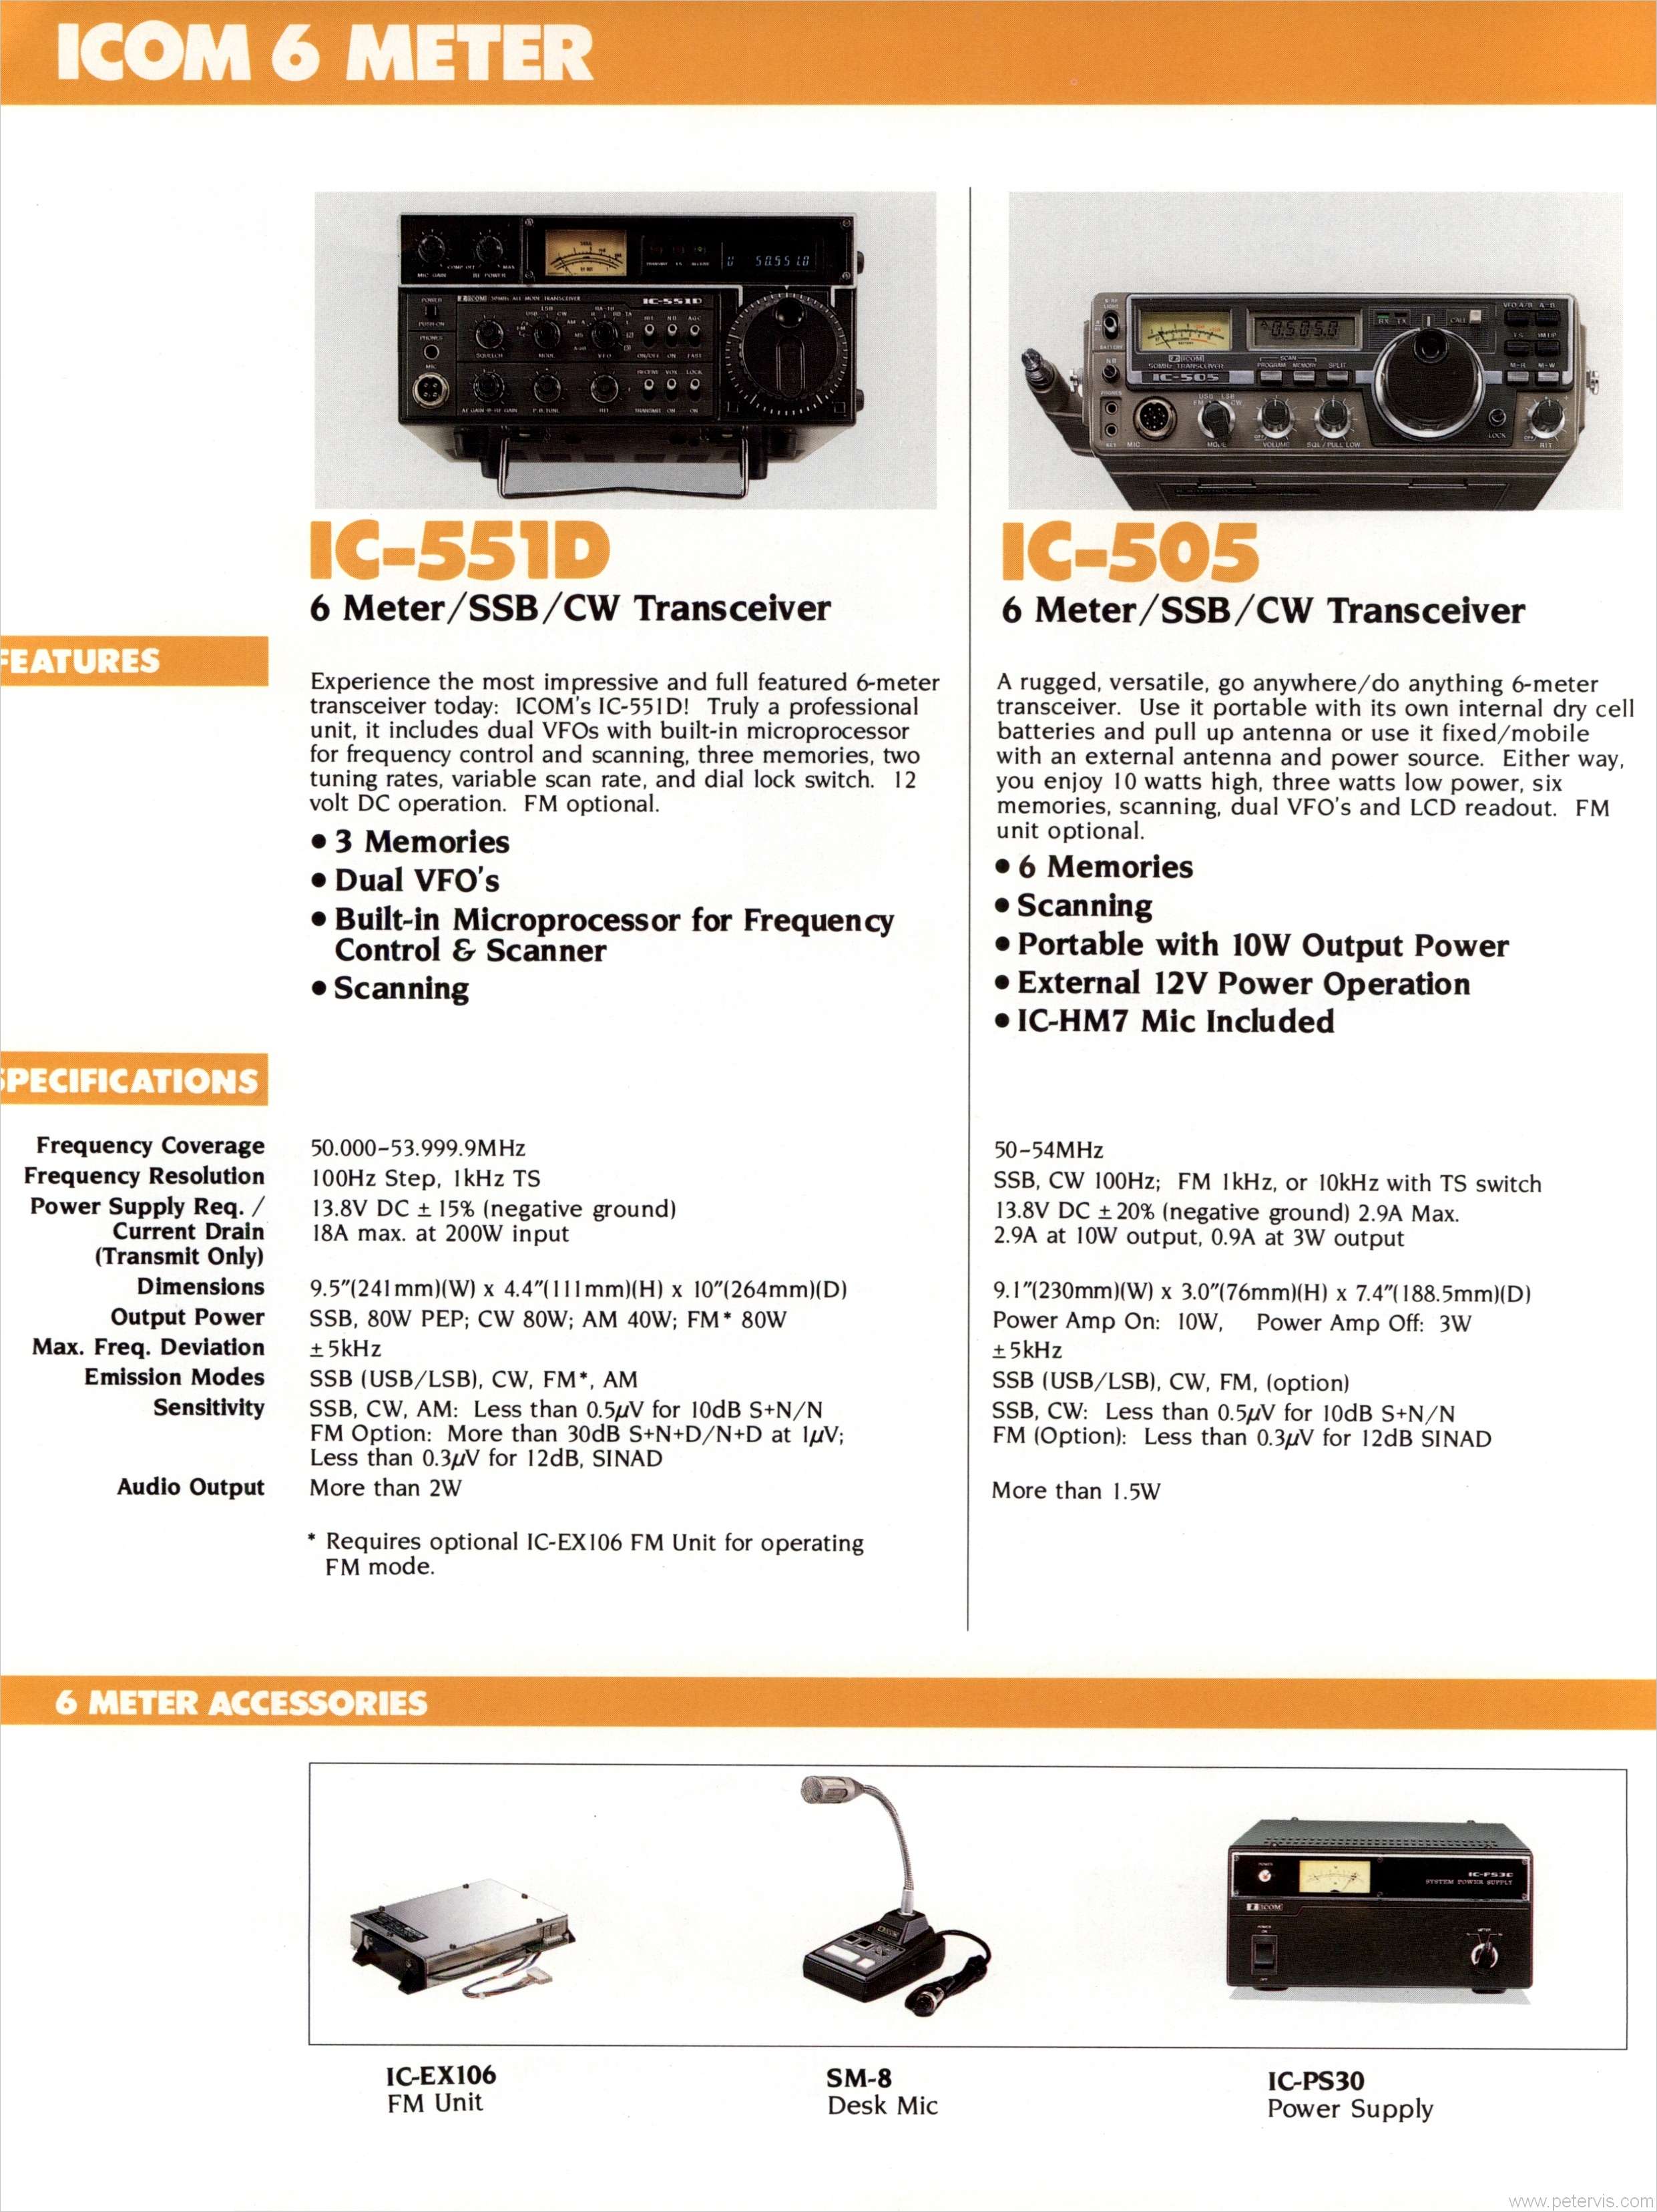 IC-551D and IC-505